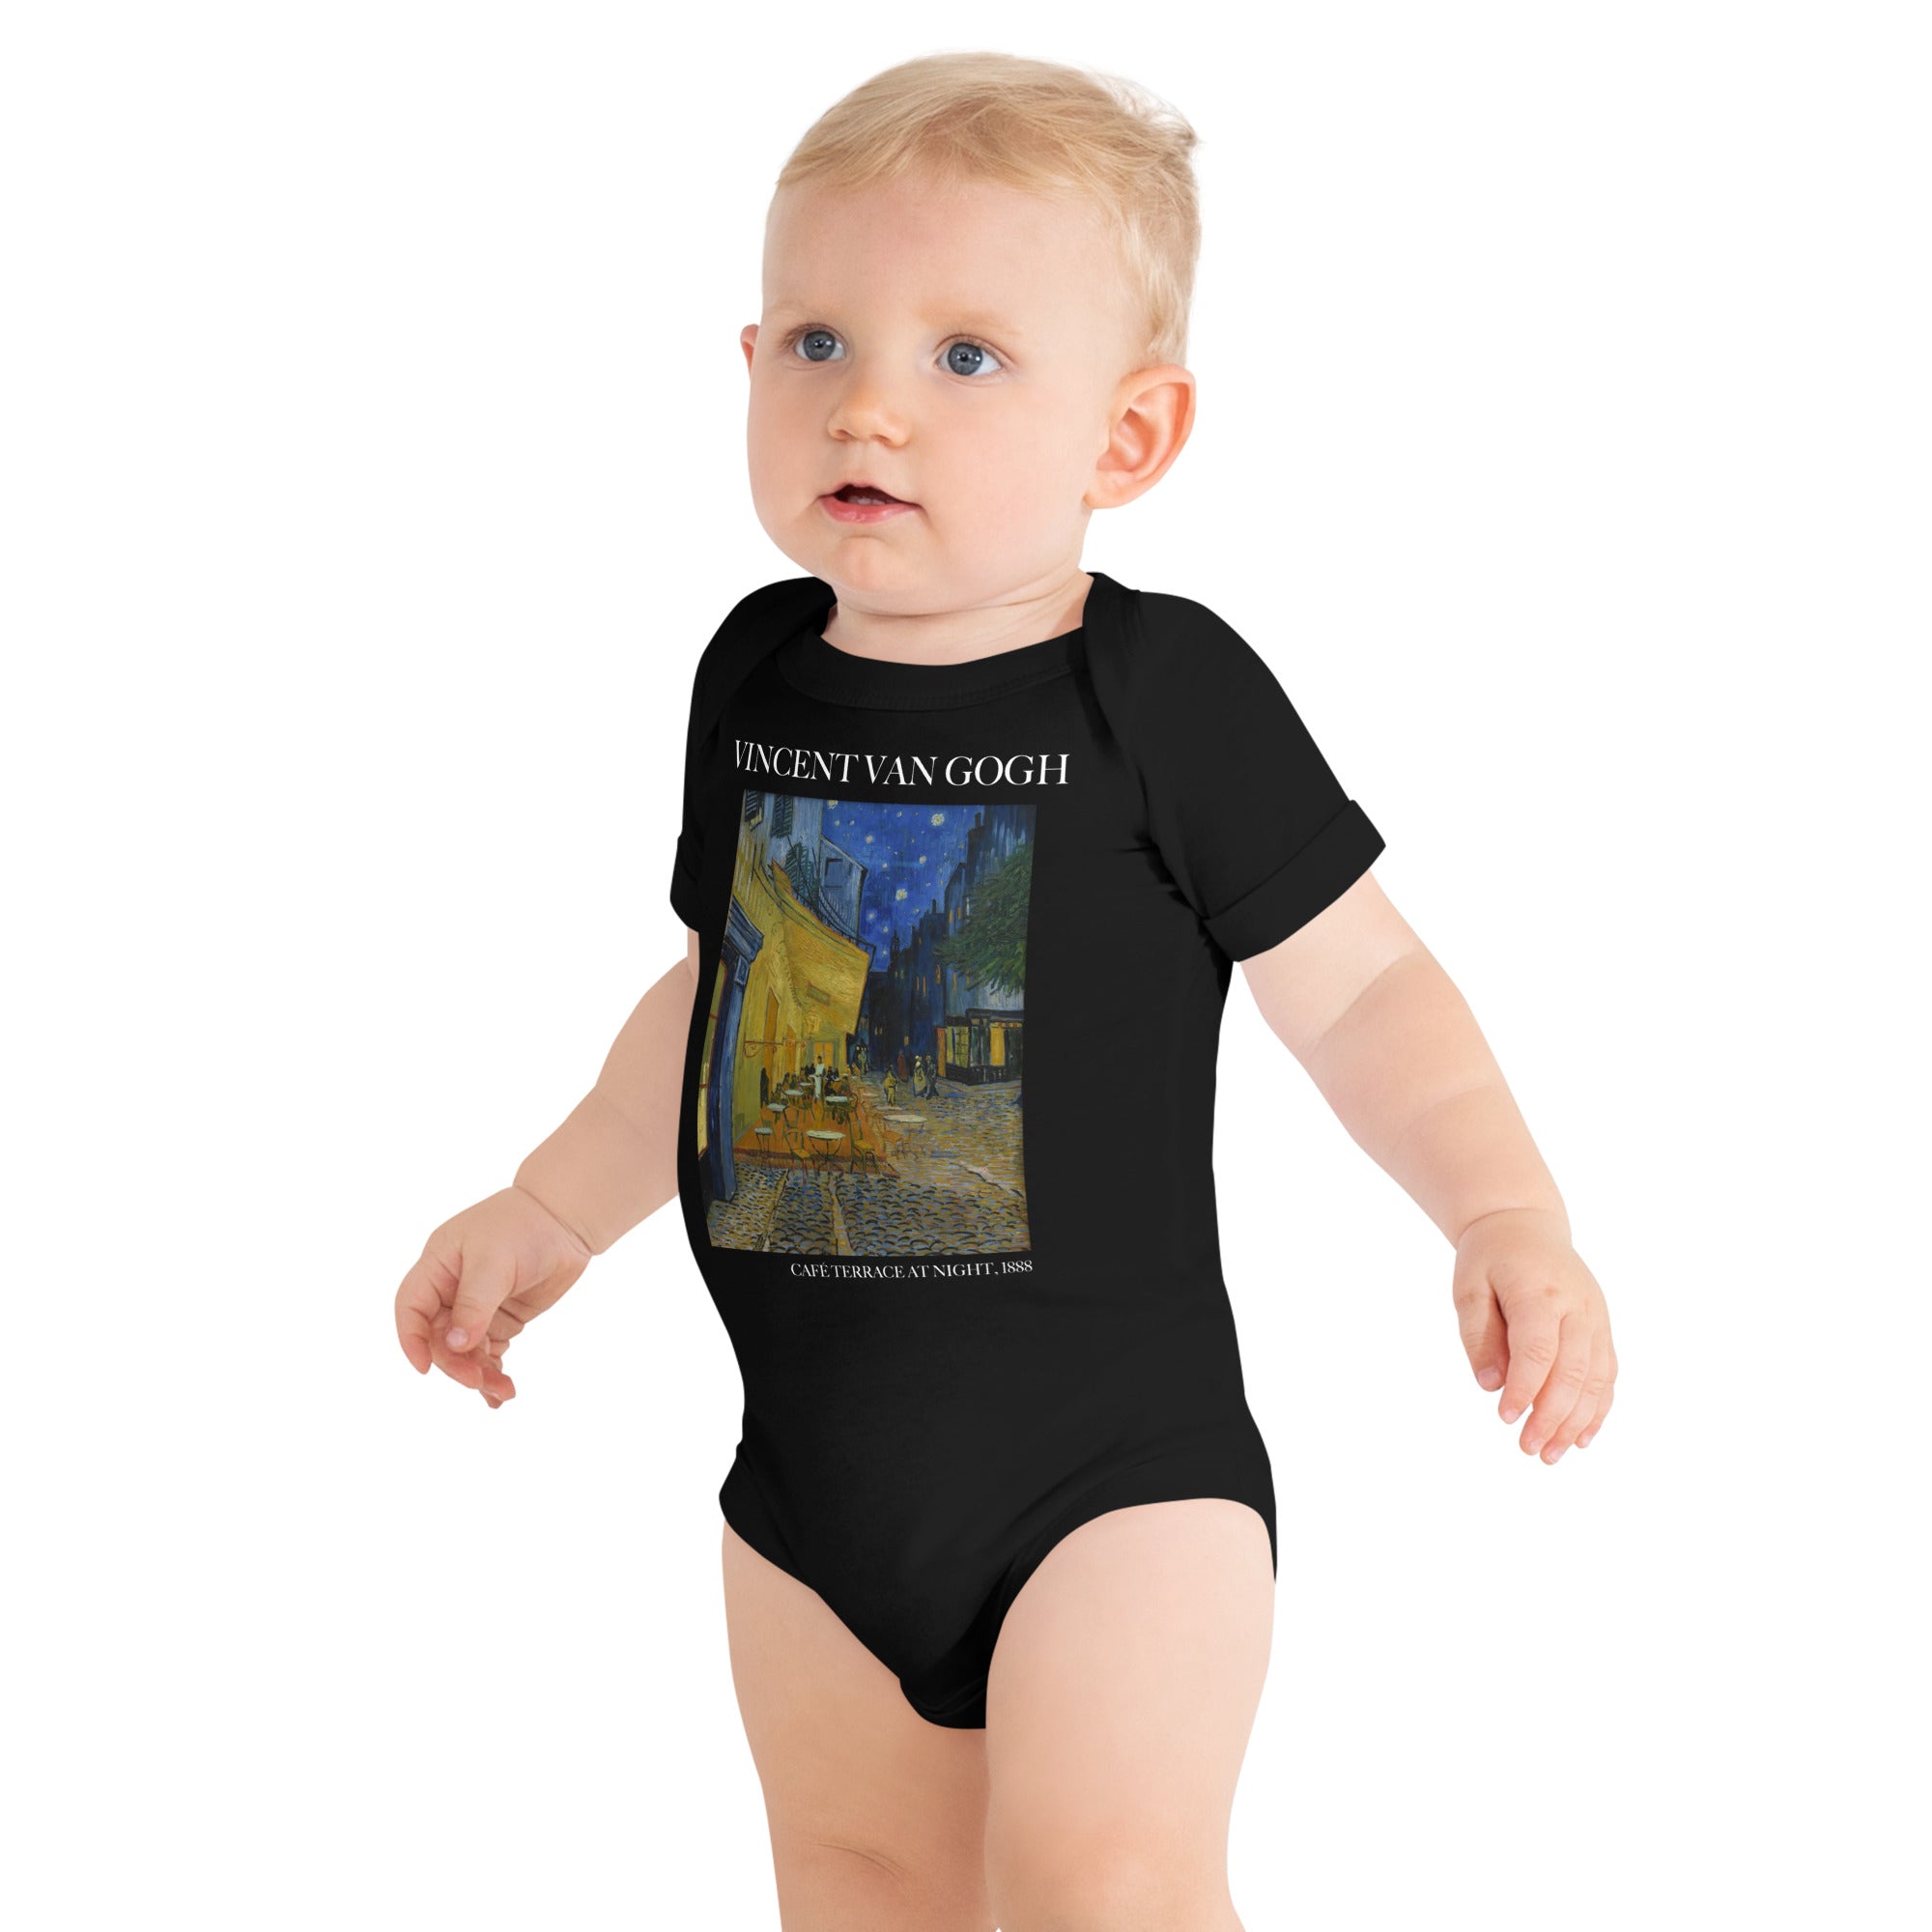 Vincent van Gogh 'Café Terrace at Night' Famous Painting Short Sleeve One Piece | Premium Baby Art One Sleeve